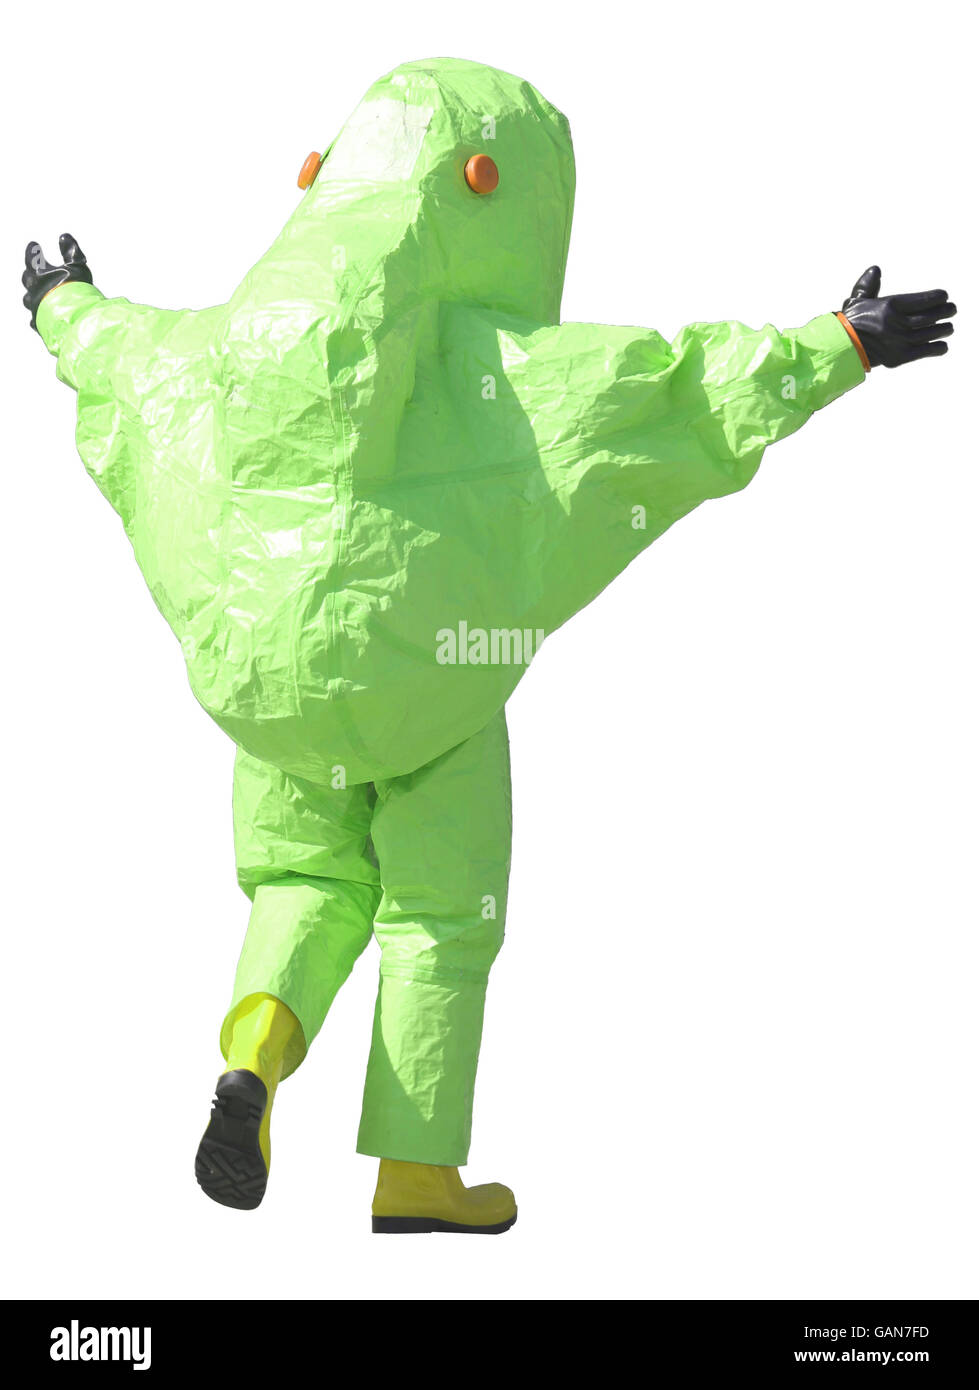 person with green protective suit to manage hazardous materials Stock Photo